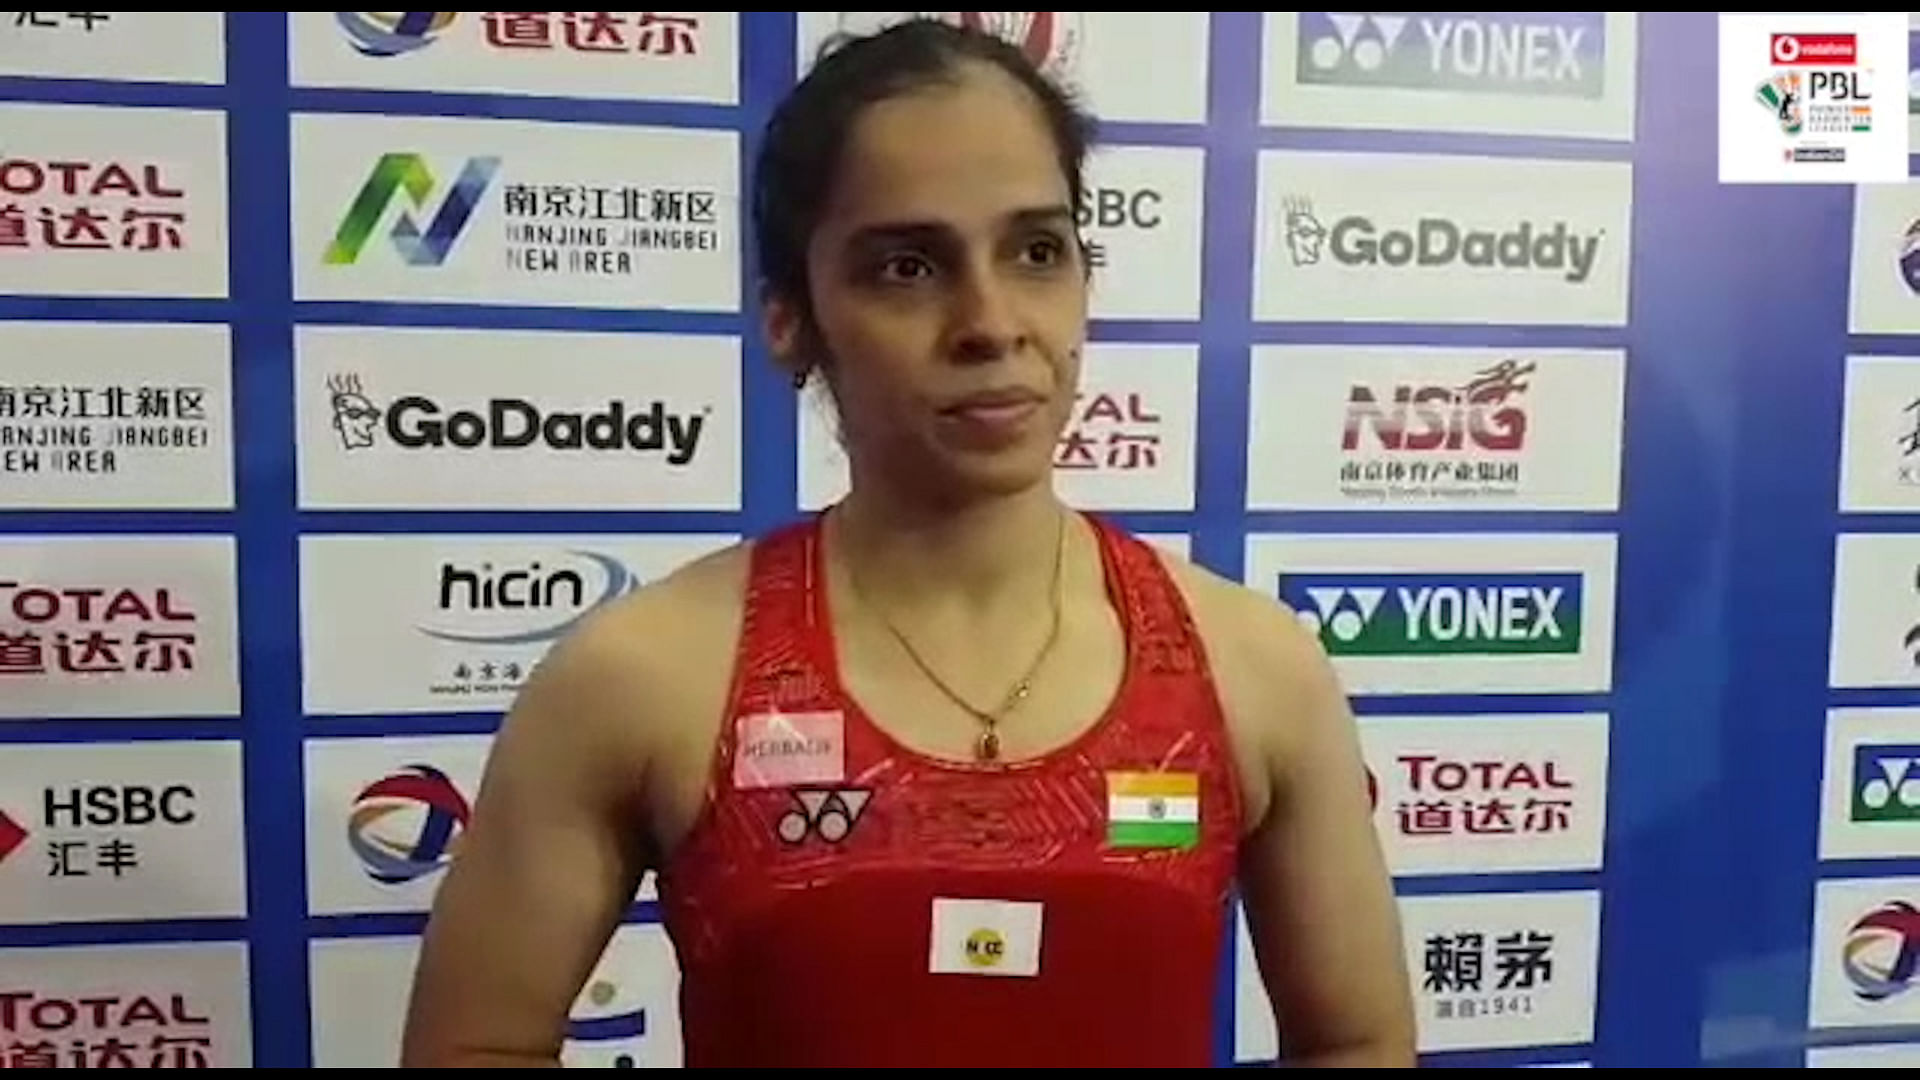 Saina Nehwal speaks about her World Championships third round win over Ratchanok Inthanon of Thailand.